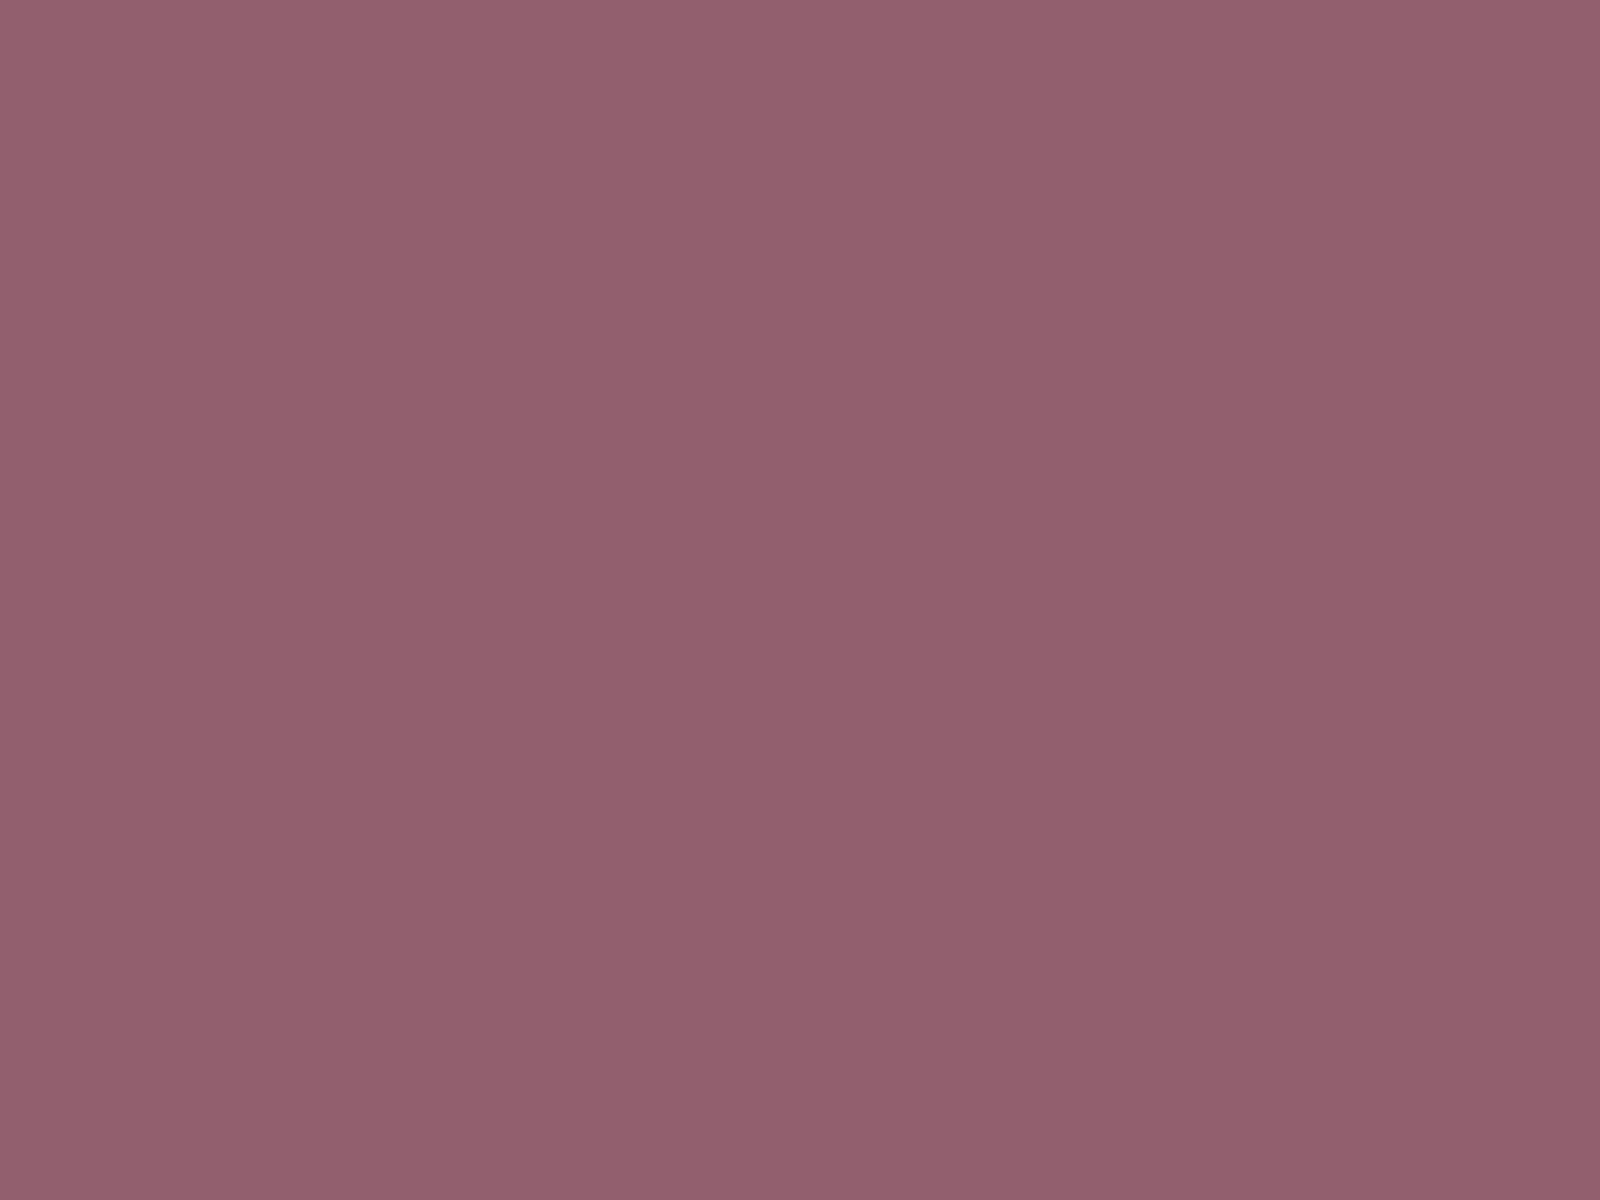 1600x1200 Raspberry Glace Solid Color Background